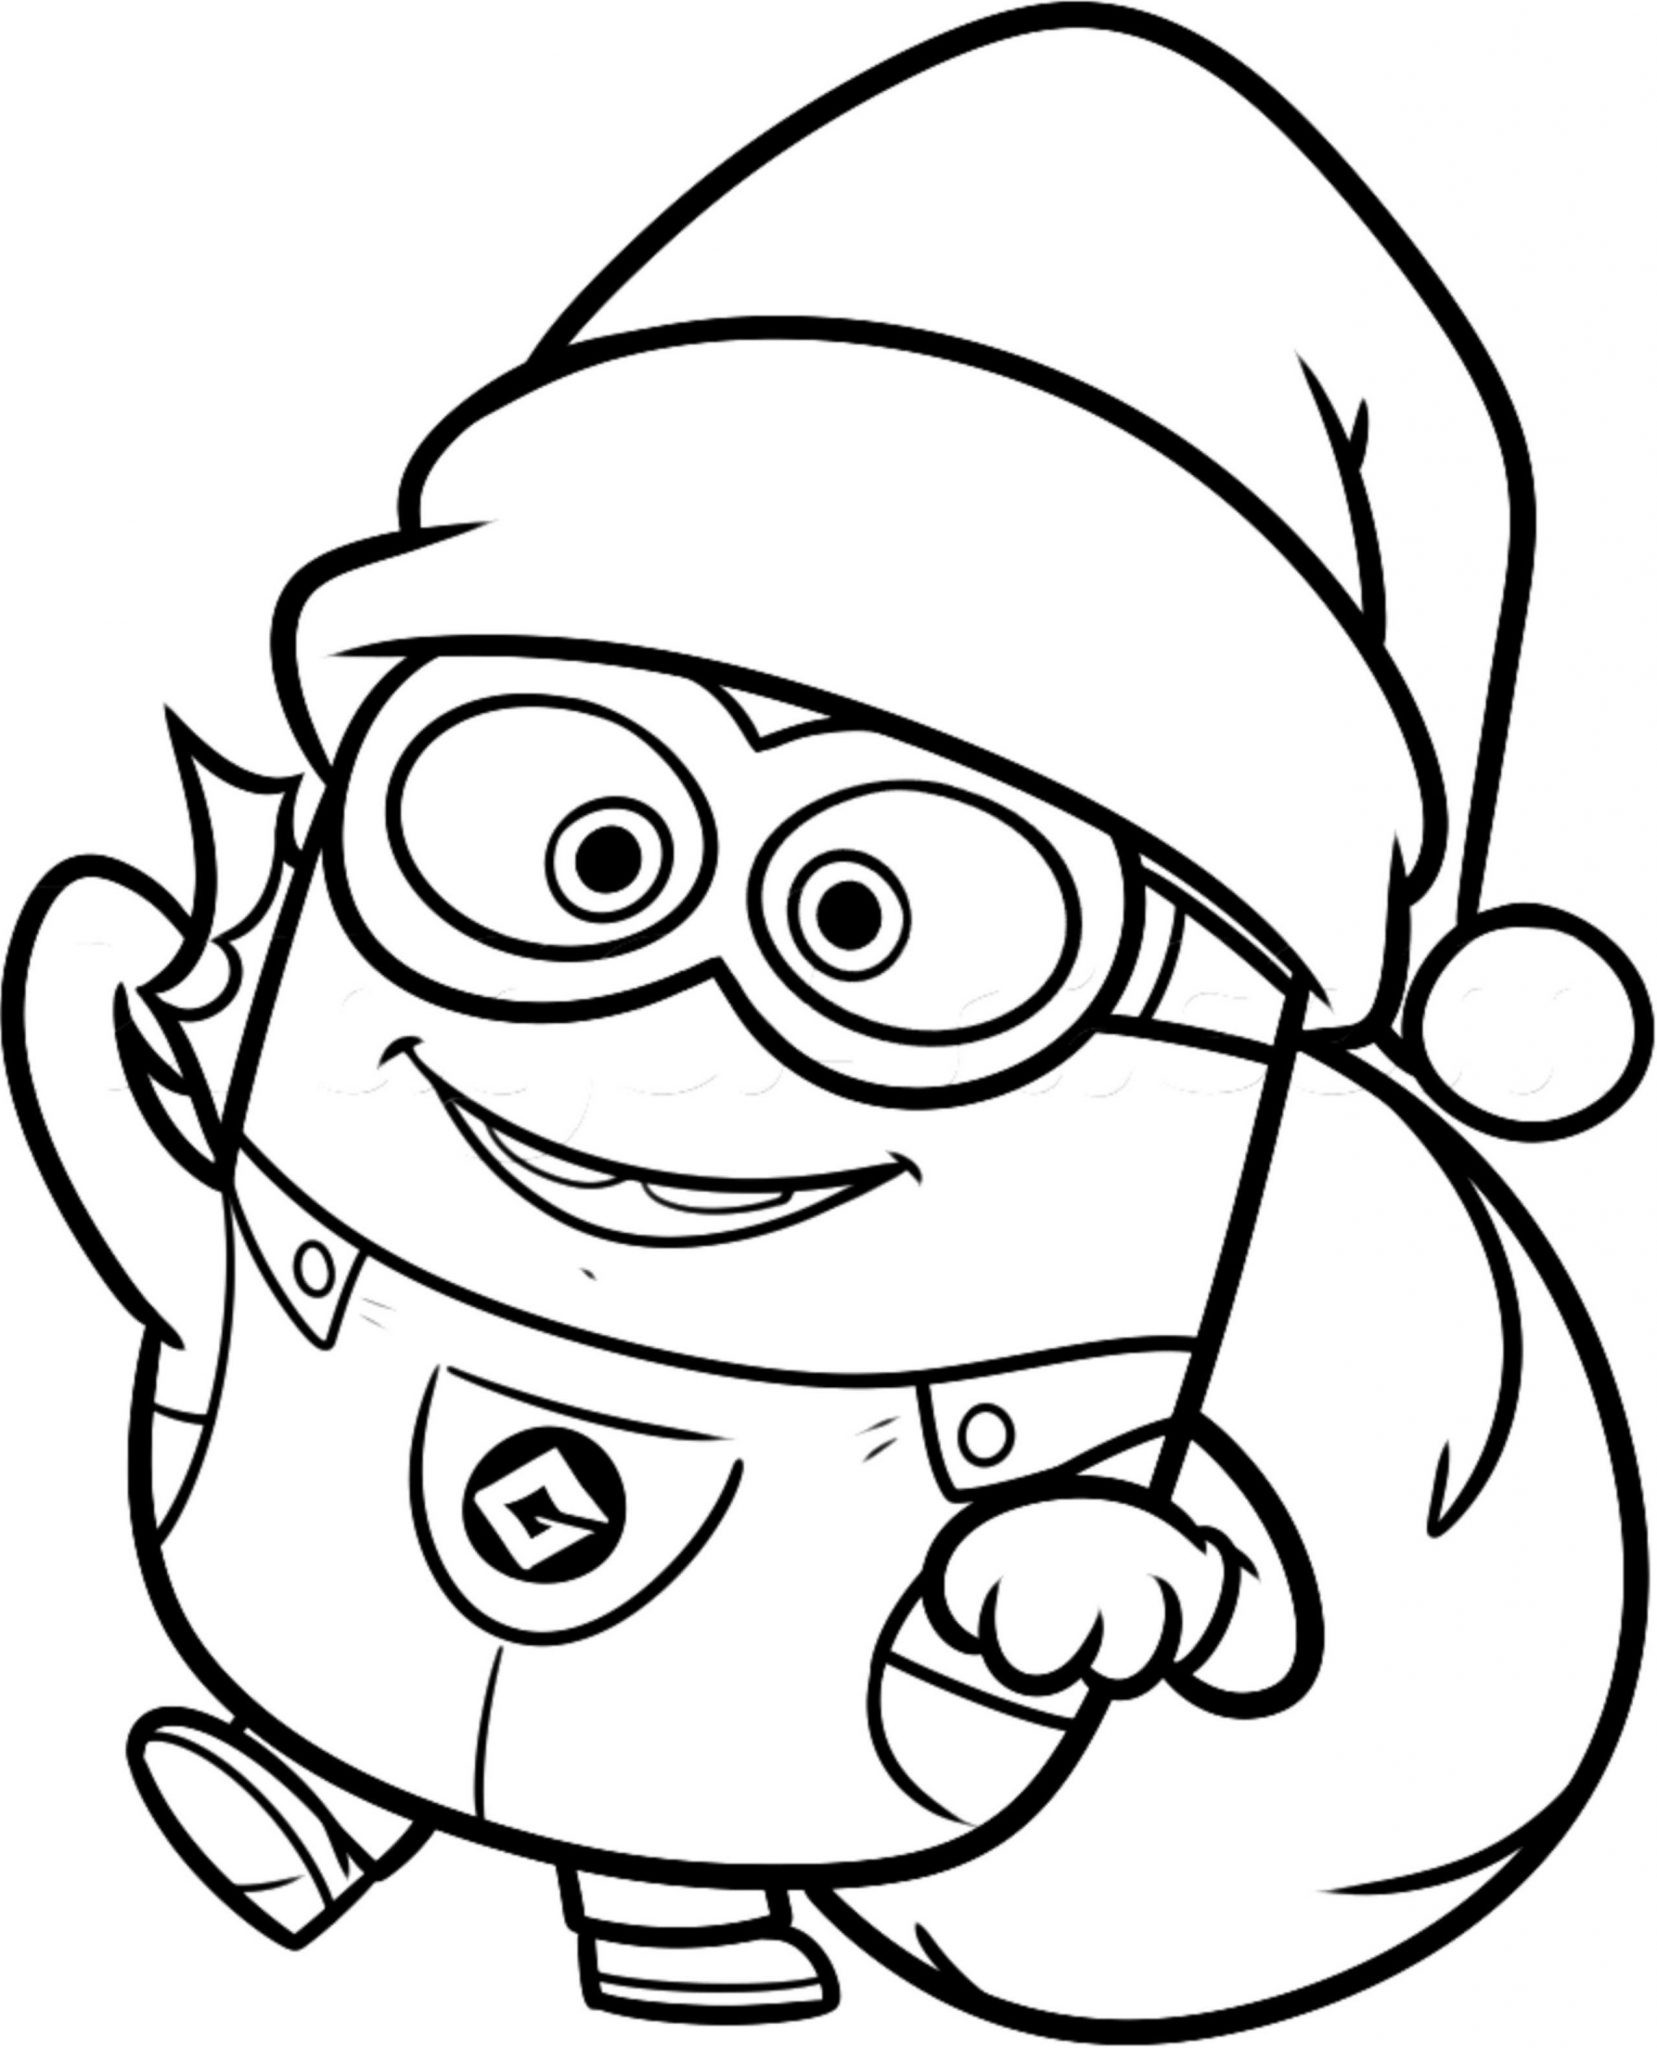 Minion Coloring Pages
 Print & Download Minion Coloring Pages for Kids to Have